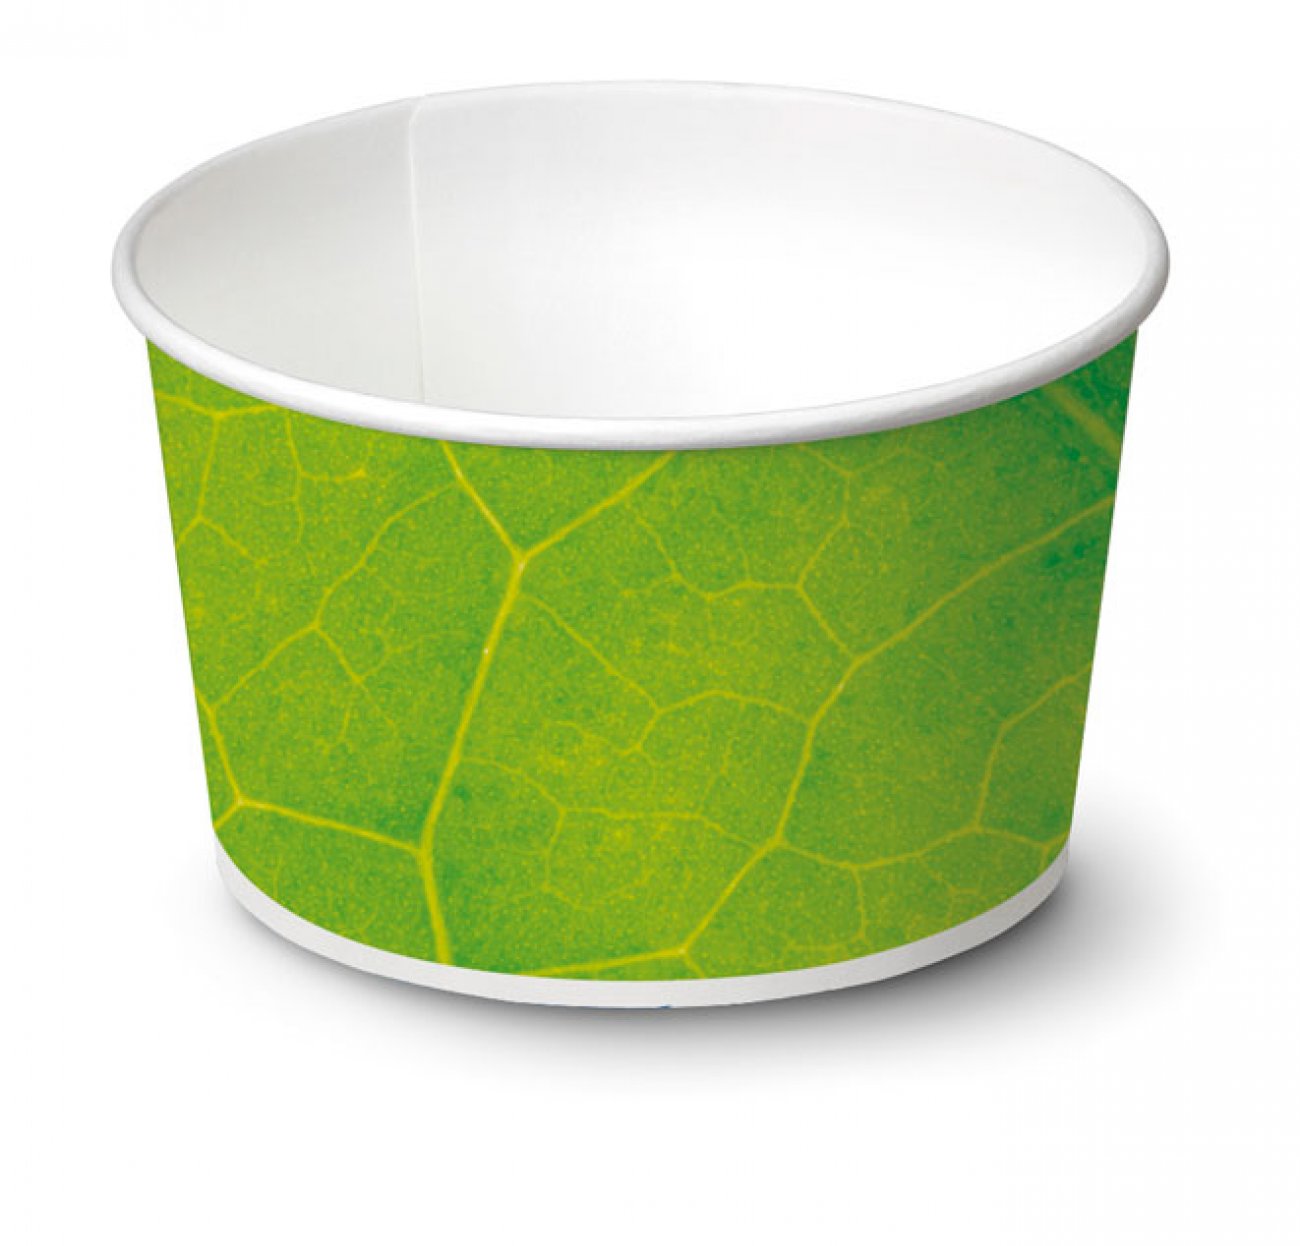 biodegradable Ice cream cup / Typ 80 / Ice cup biodegradable paper